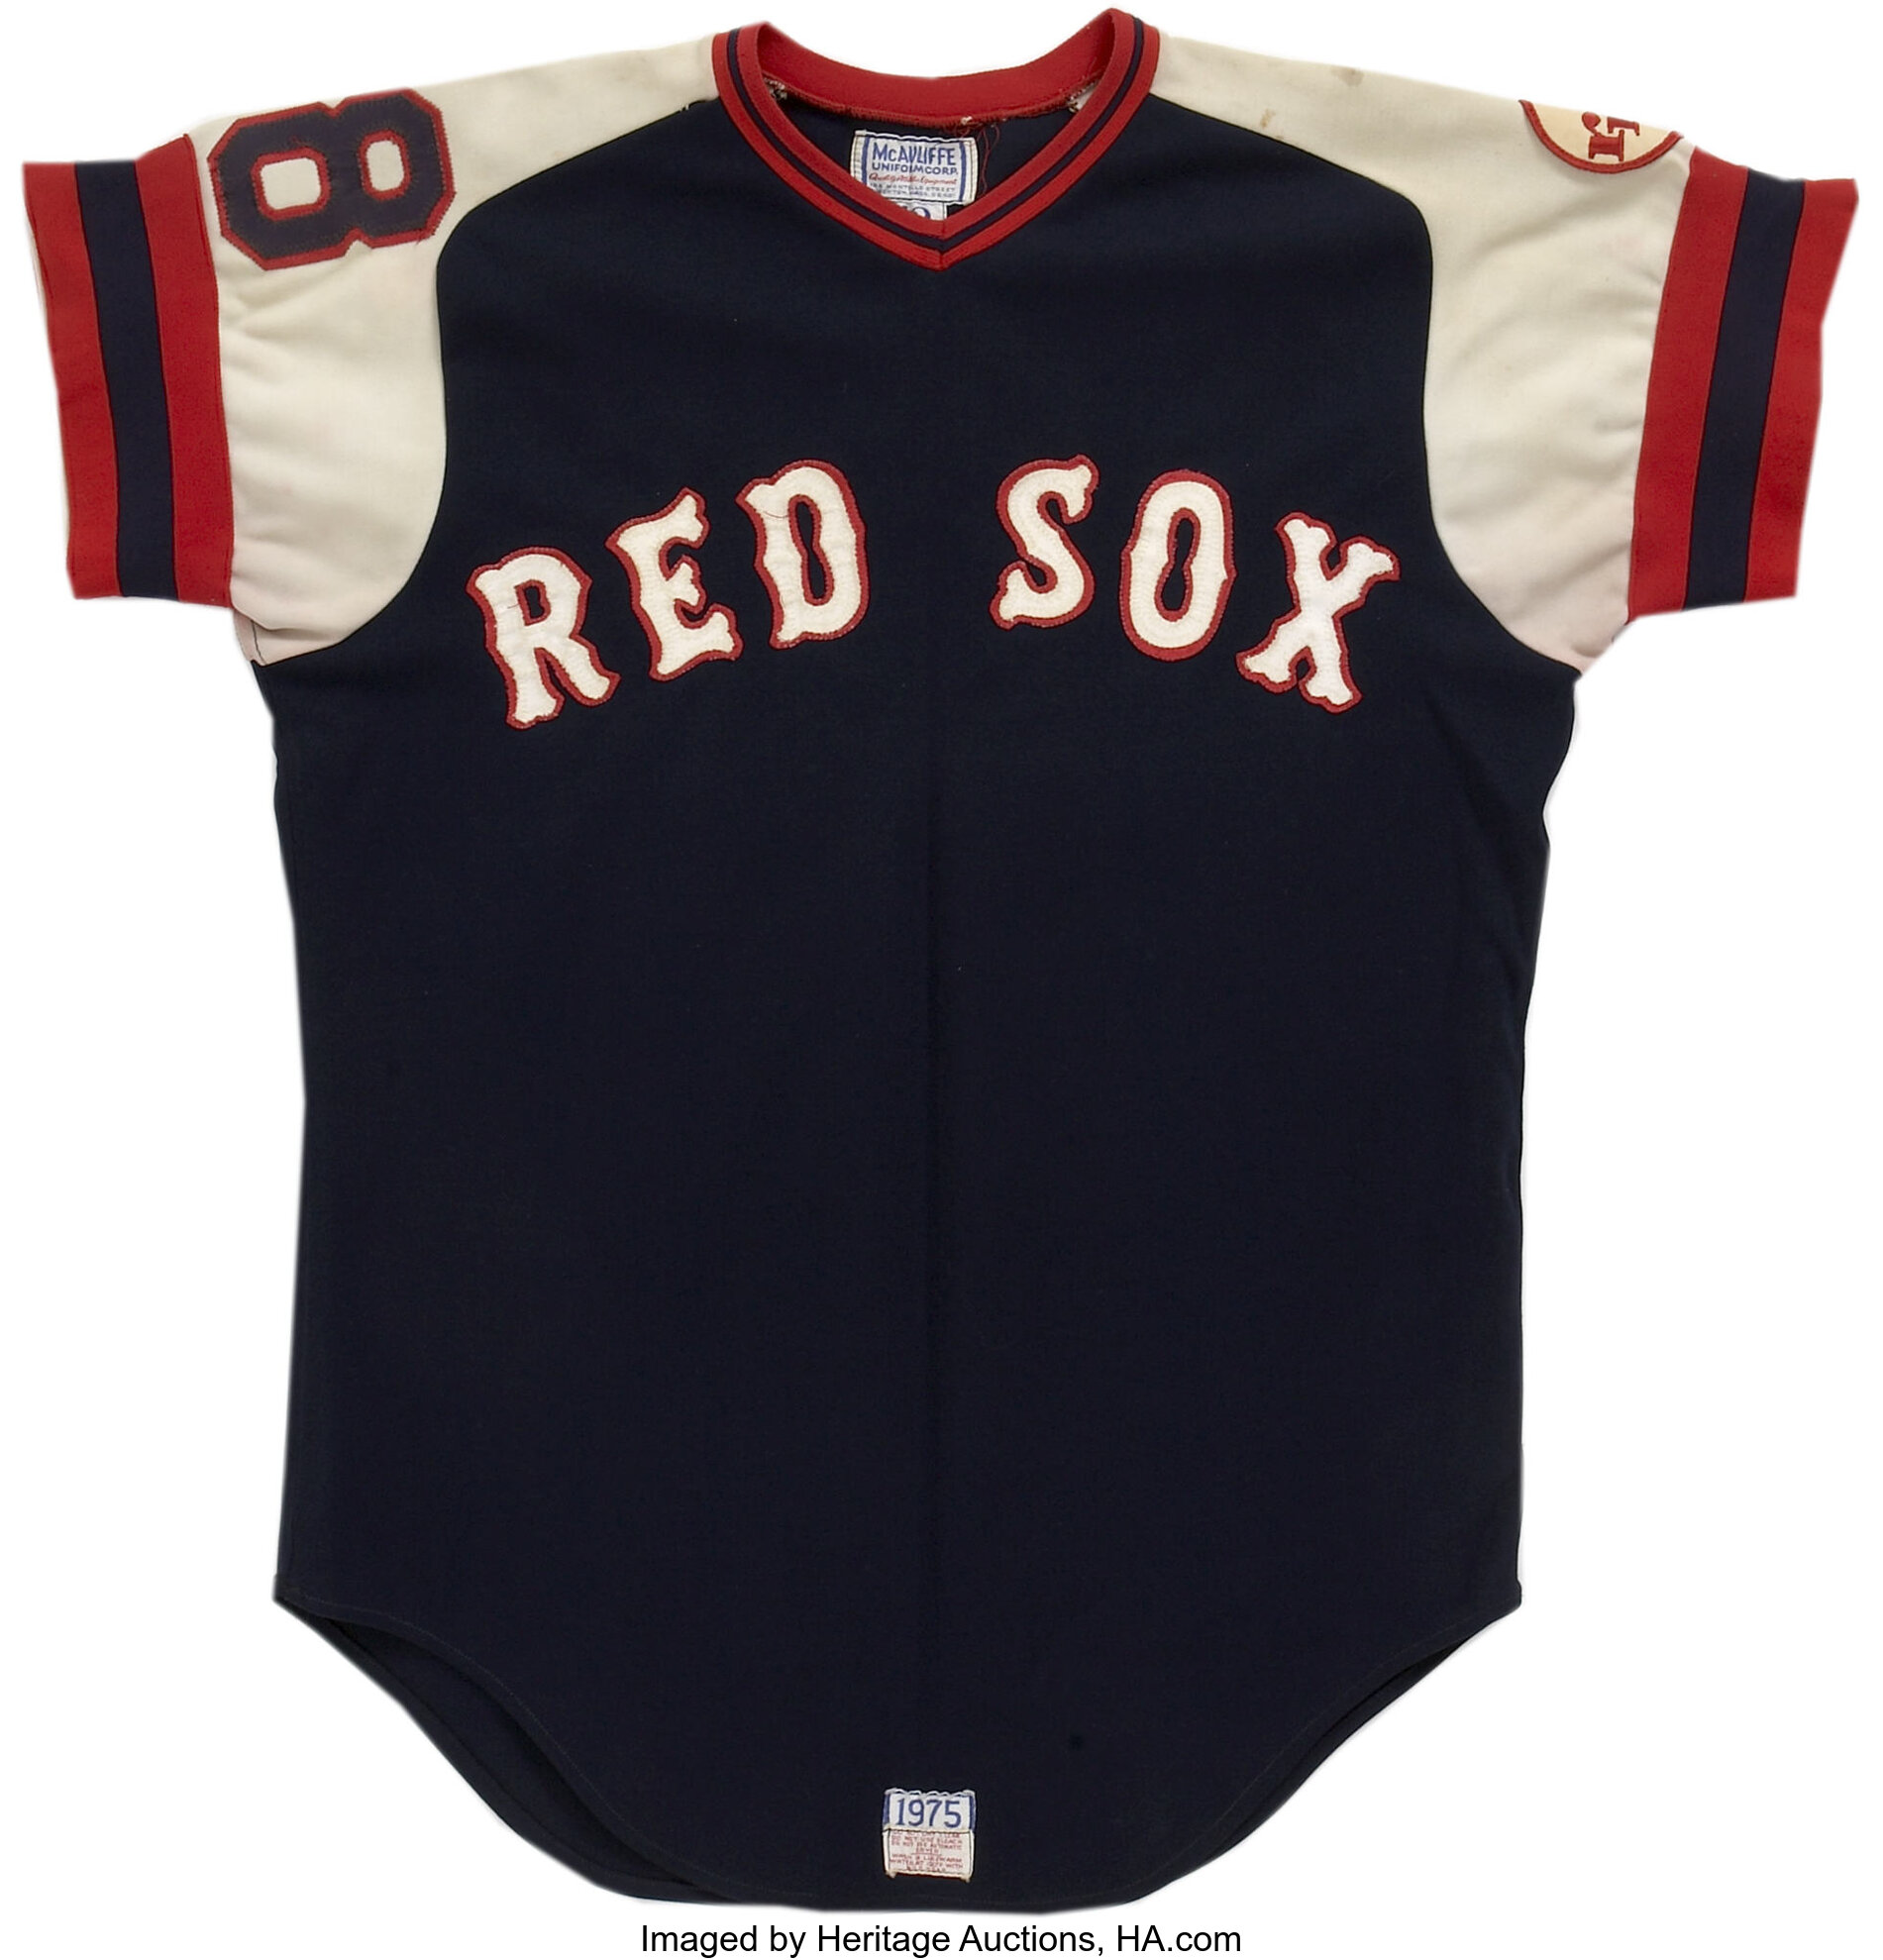 Pawtucket Red Sox PawSox #38 Game Used Navy Jersey XL DP09868